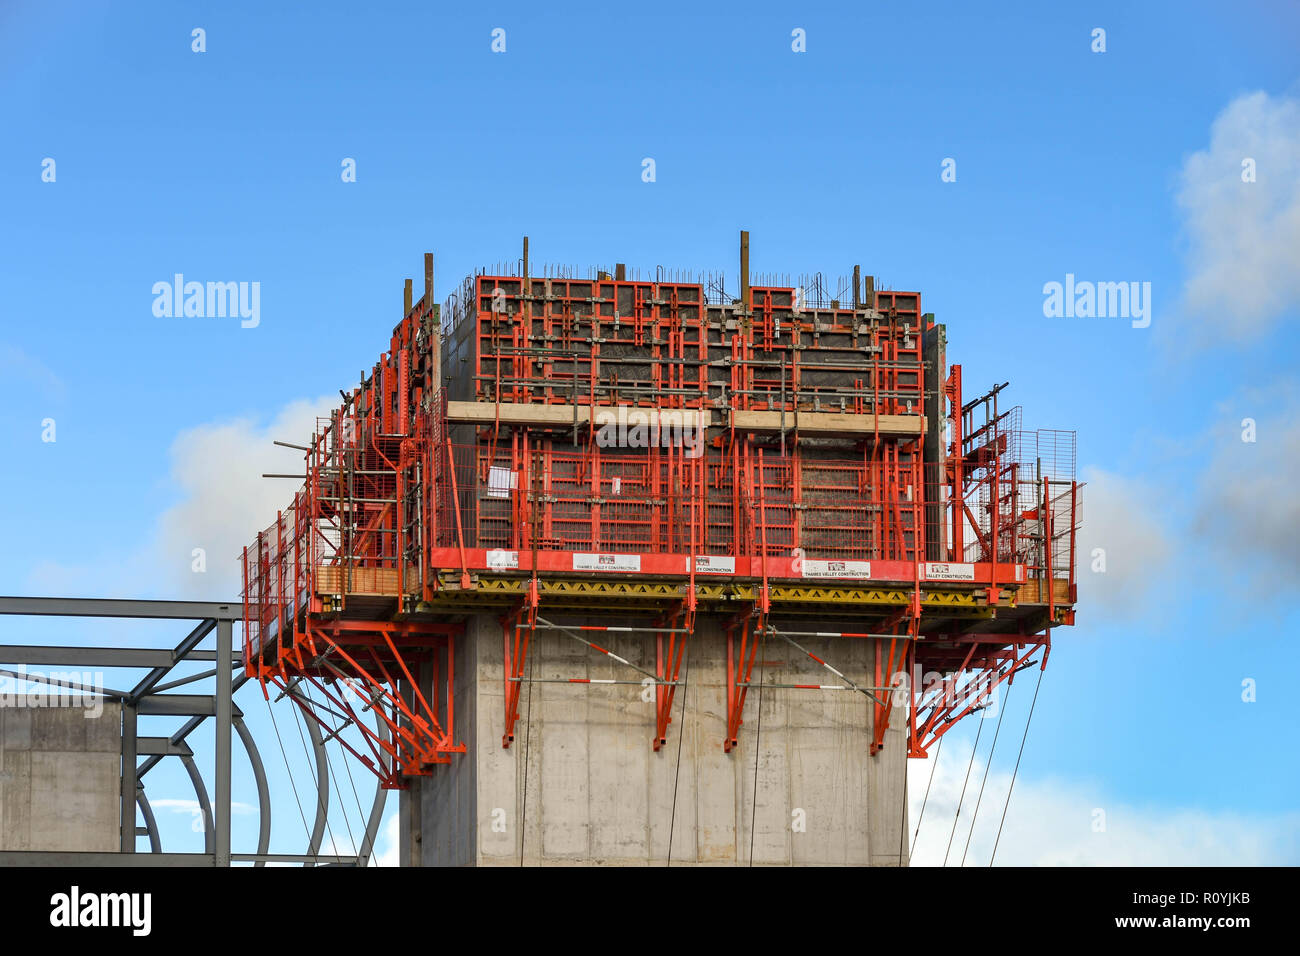 PONTYPRIDD, WALES - OCTOBER 2018: Steel shuttering and supports fixed to the concrete elevator shaft of a new building on a site in Pontypridd town ce Stock Photo